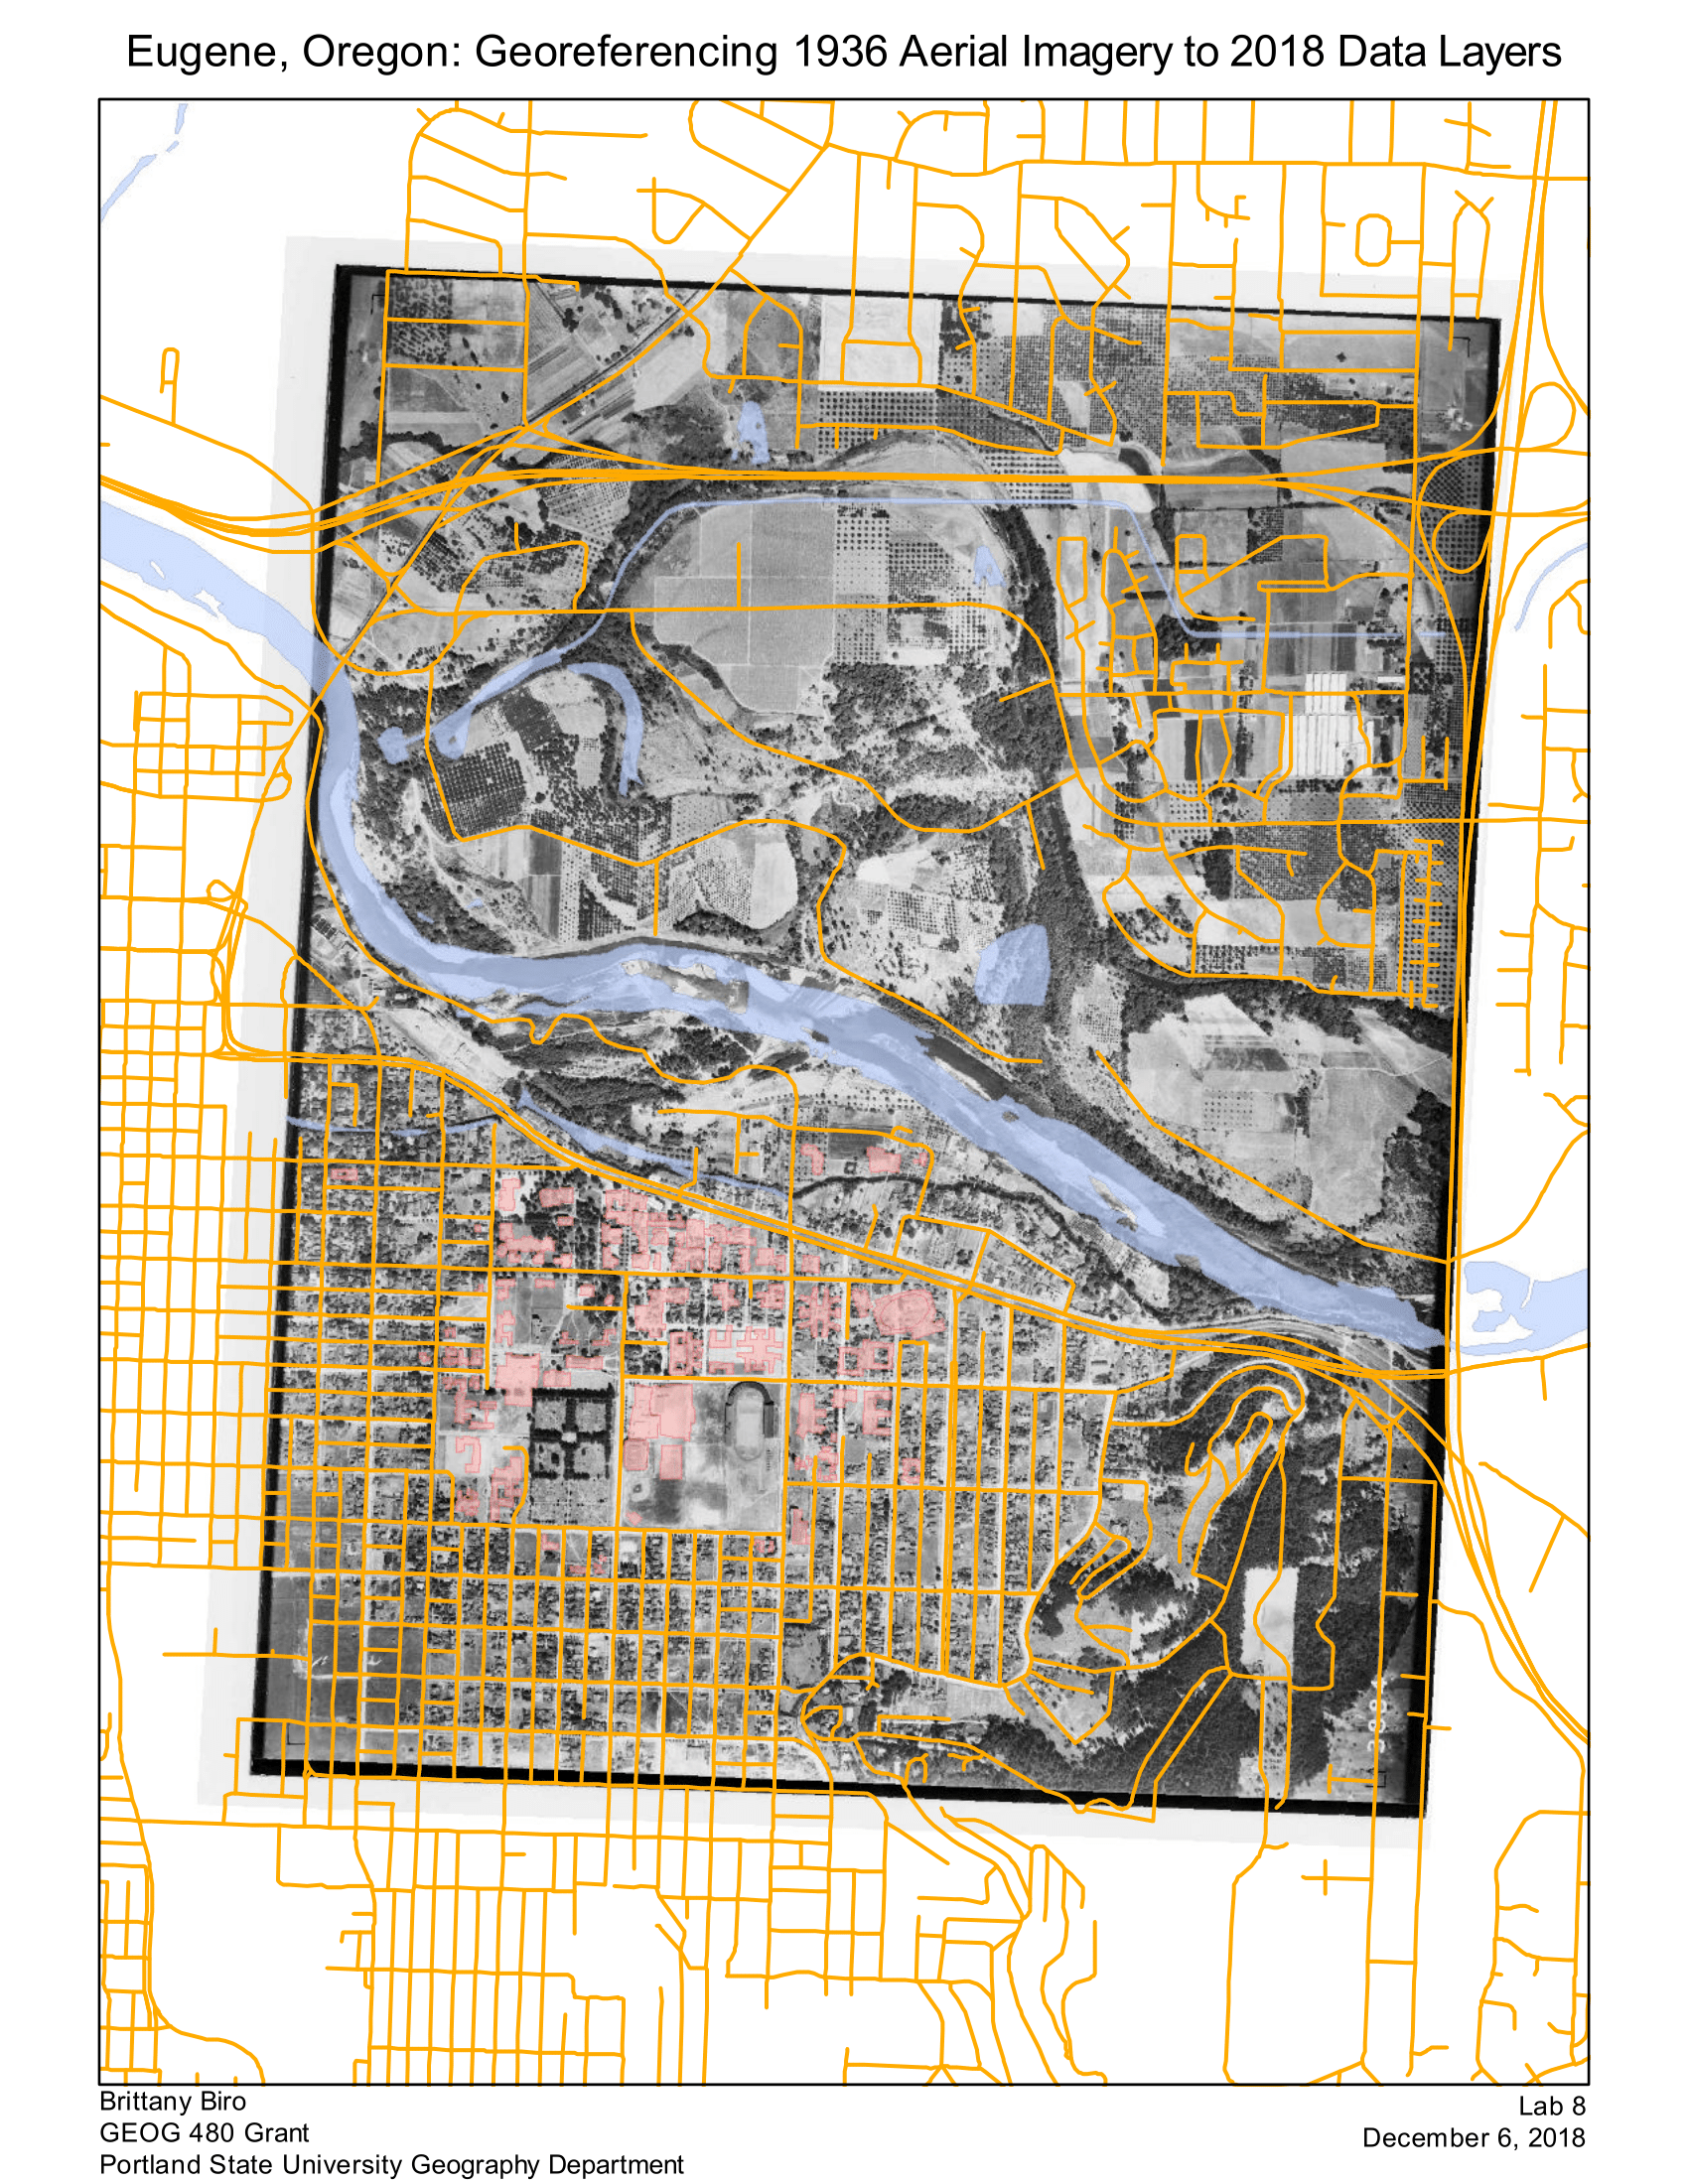 Georeferencing 1936 Aerial Imagery